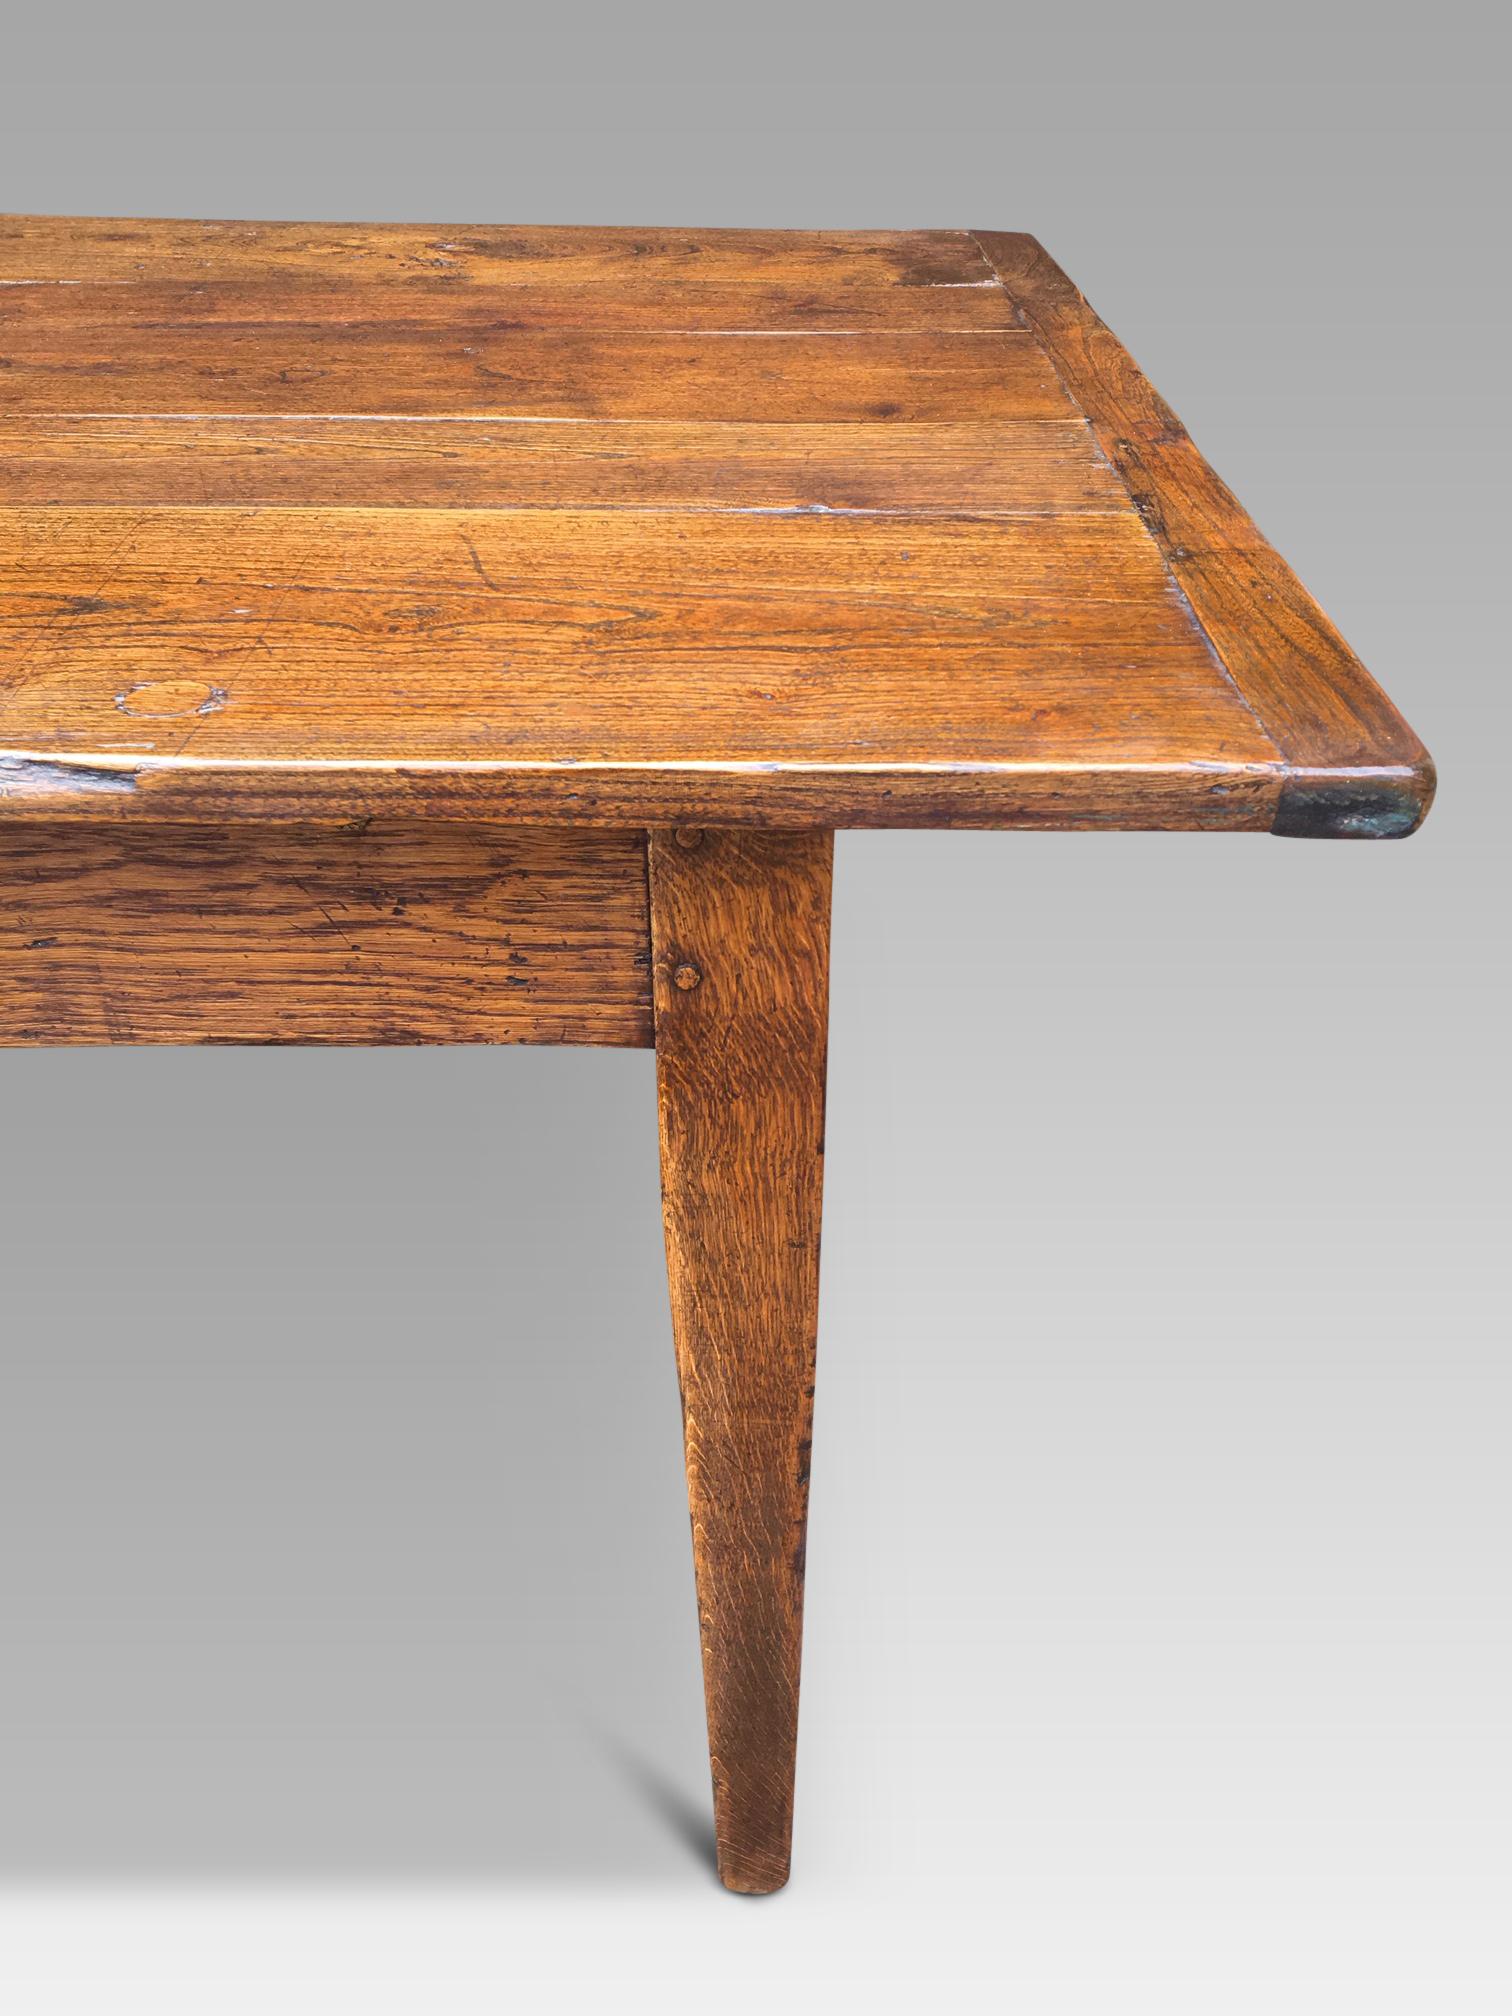 Good family size farmhouse Elm table, circa 1880 measuring 9 ft long by 3 ft. wide. 
This farmhouse table stands on robust tapered legs, has 2 end drawers and a top with a generous overhang.
The table top is flat and level with a warm mid oak colour